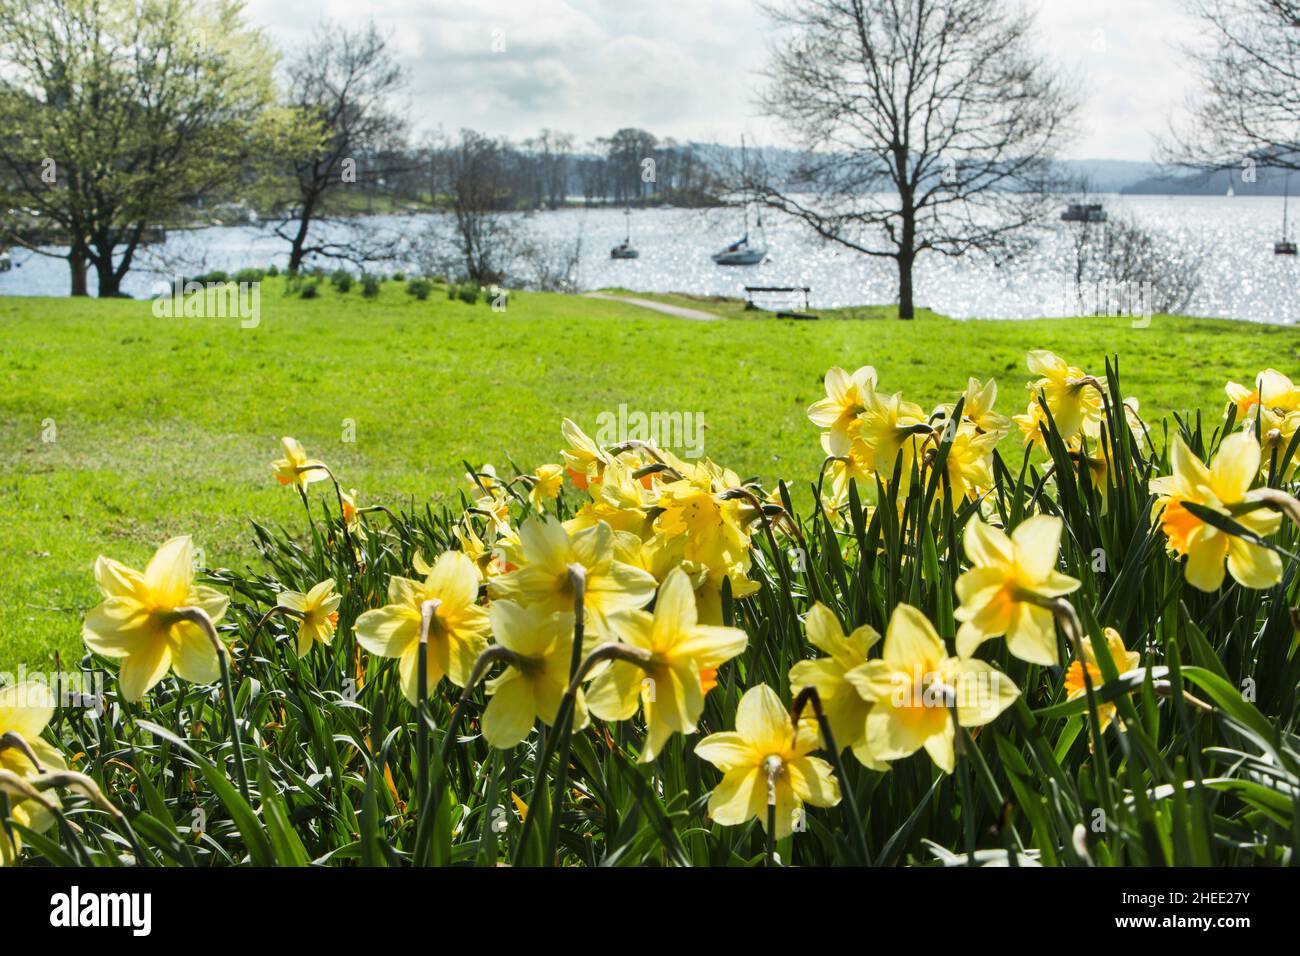 William Wordsworth's host of golden daffodils beside Windermere  in Borrans Park, Ambleside, The Lake District National Park, Cumbria, England Stock Photo